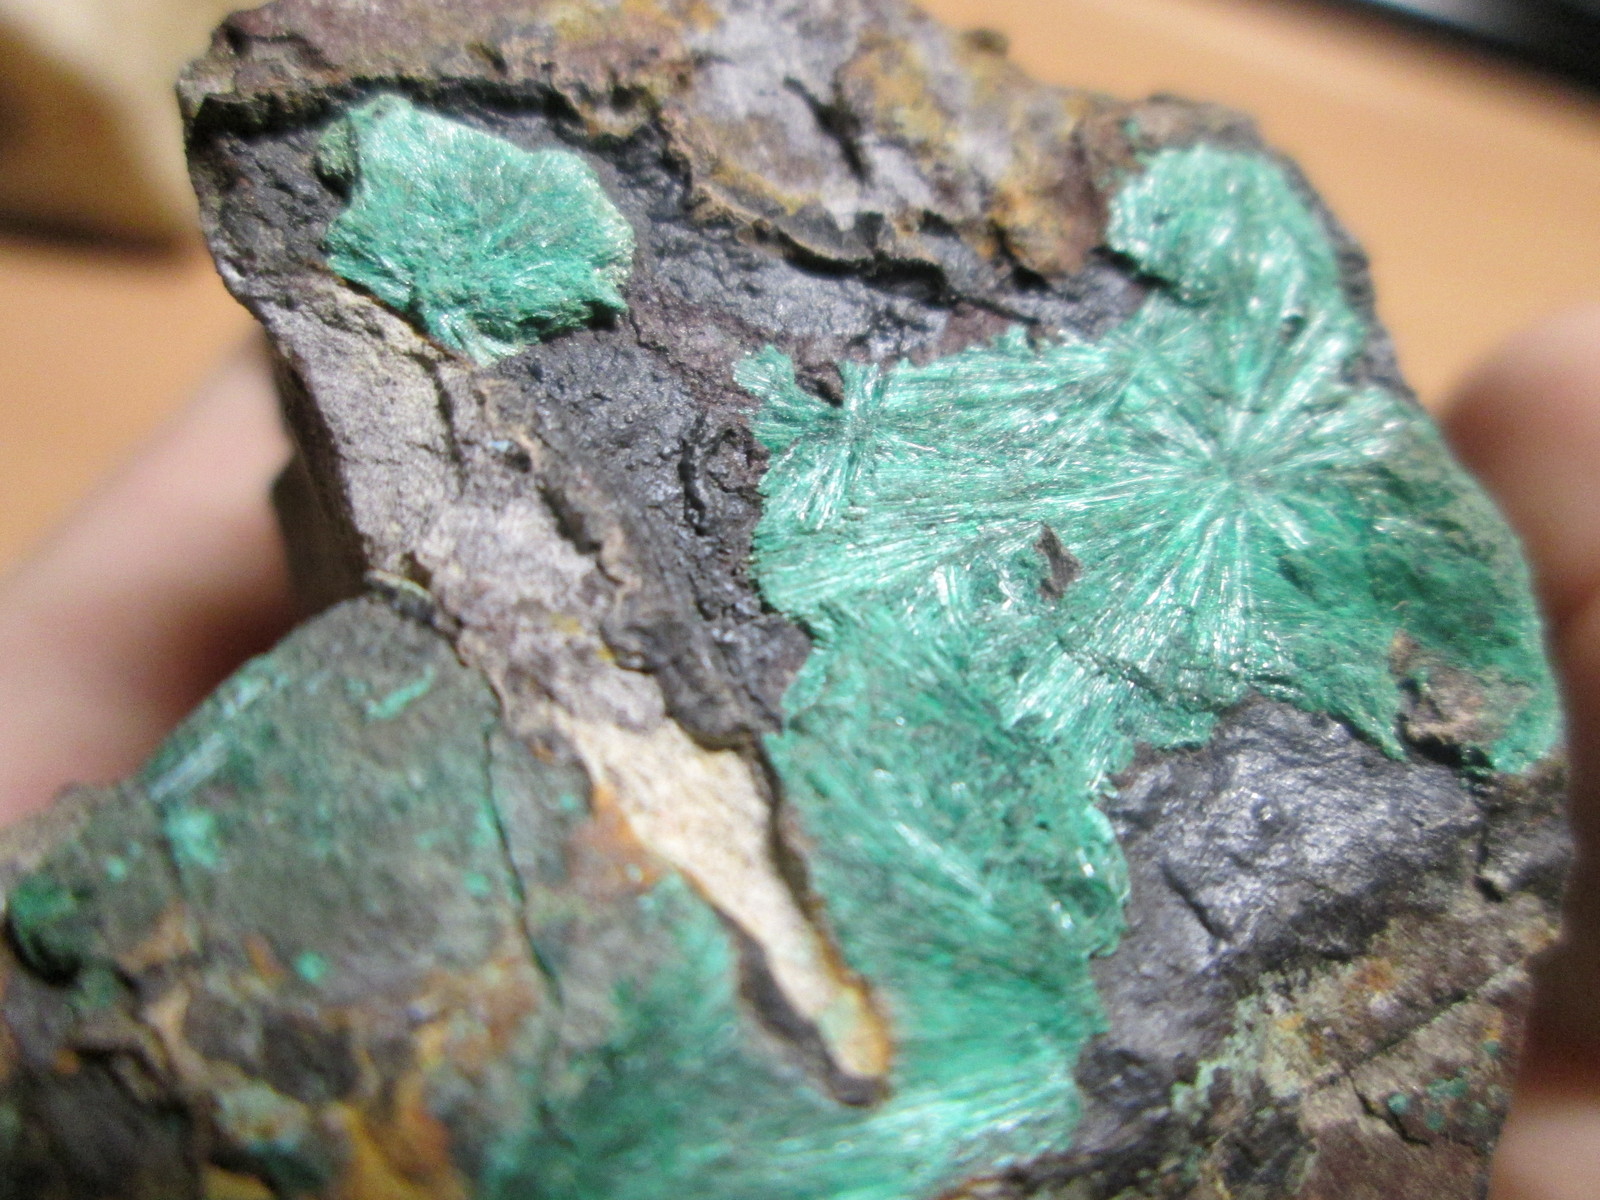 Able to surprise... - My, Longpost, Minerals, Collection, The photo, Geologists, Geology